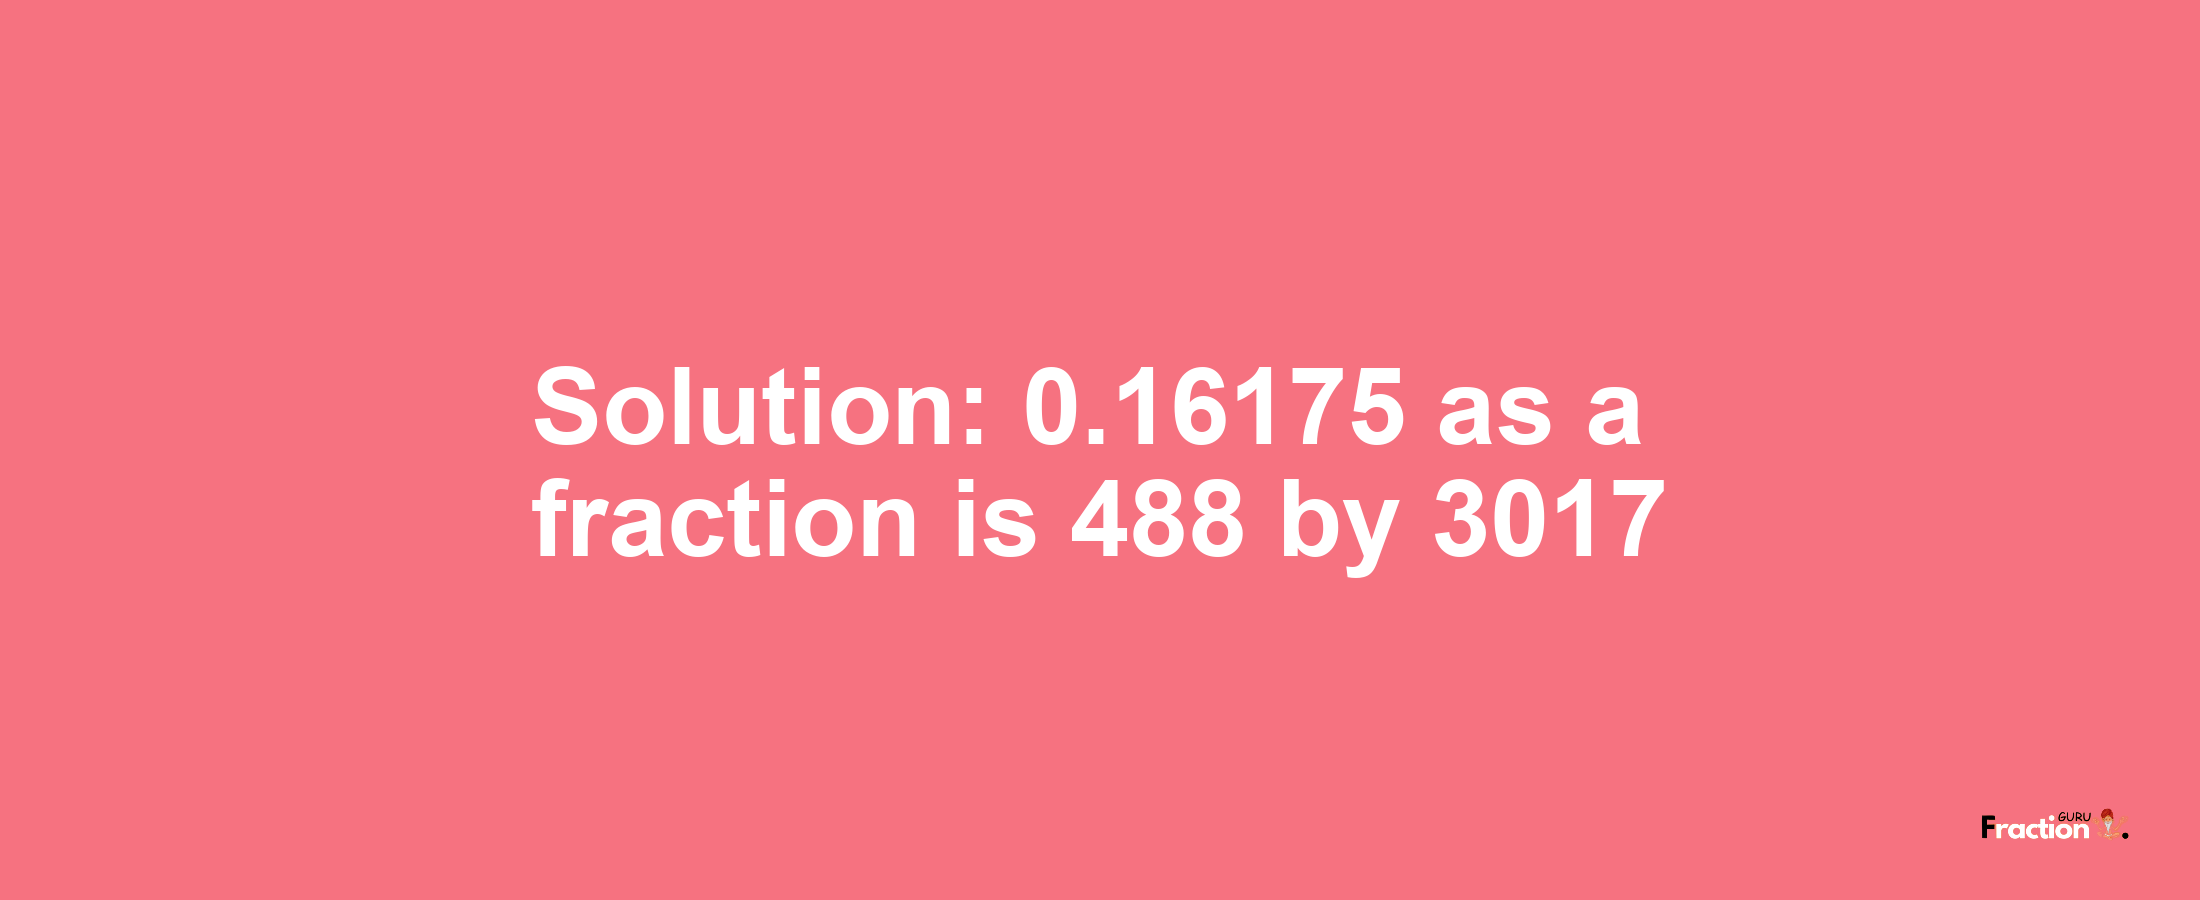 Solution:0.16175 as a fraction is 488/3017